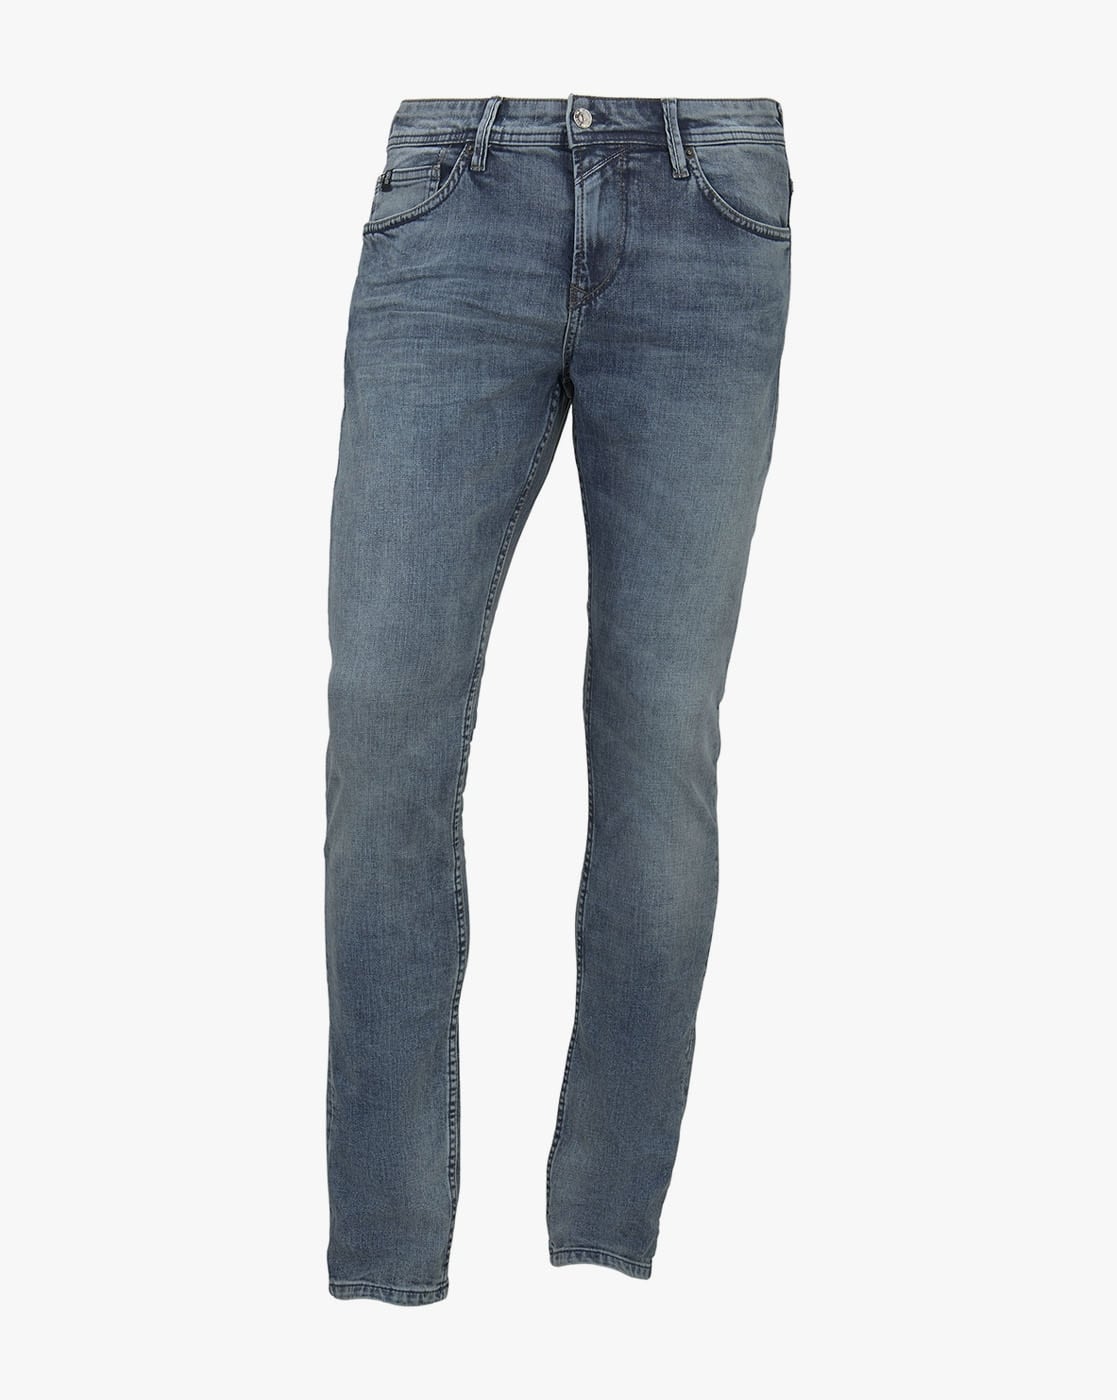 Amazon.com: Tom Tailor Josh Jeans 31 : Clothing, Shoes & Jewelry